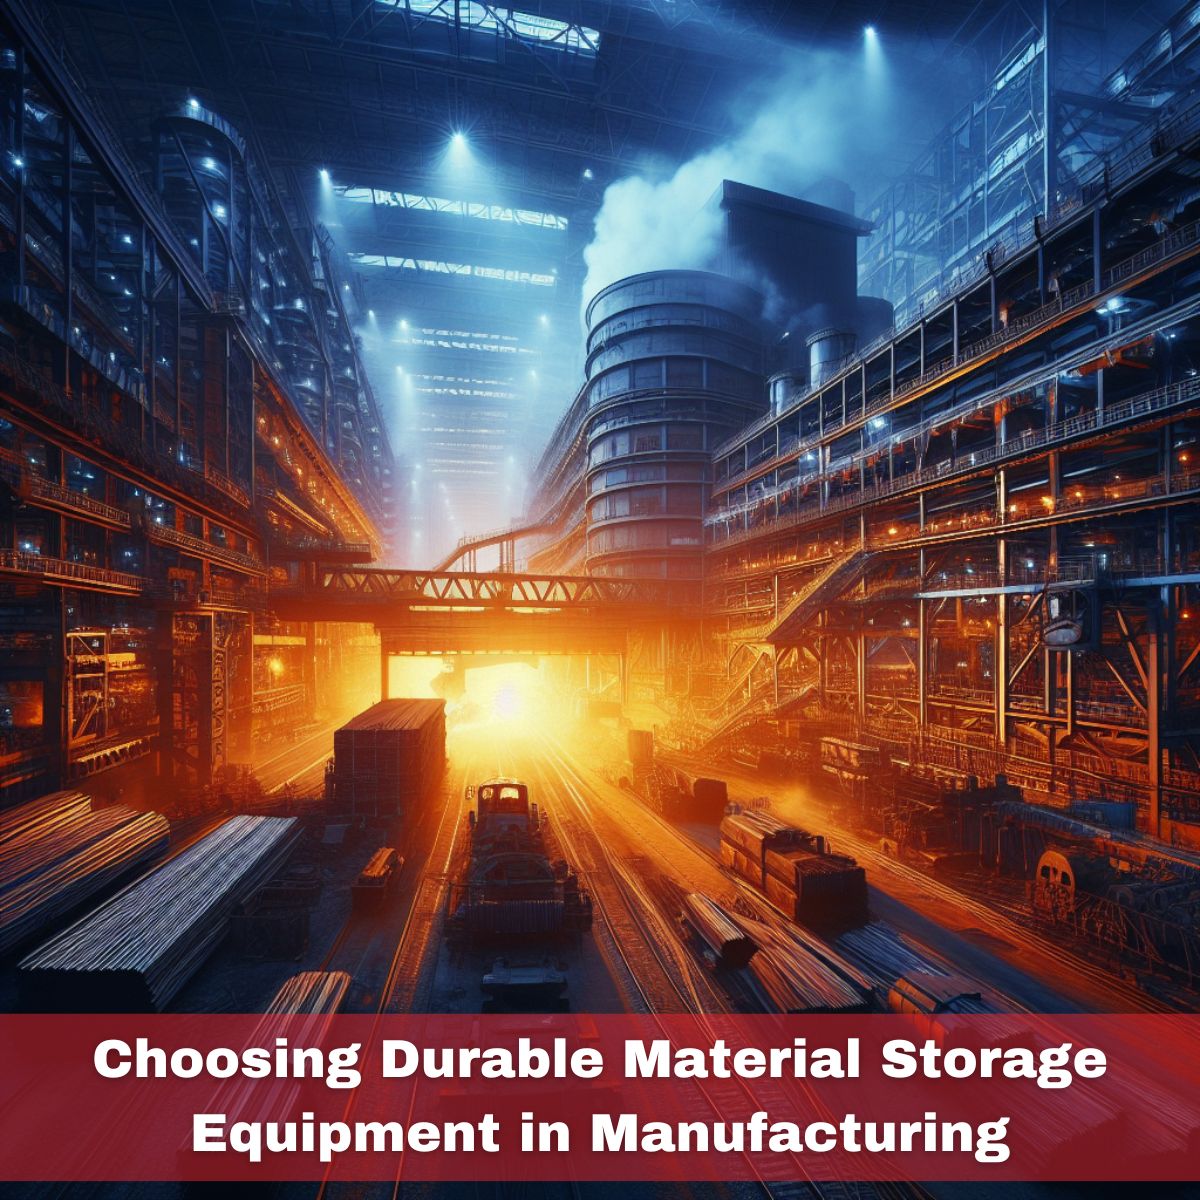 Optimize Your Space with Durable Material Storage Equipment - MH&More